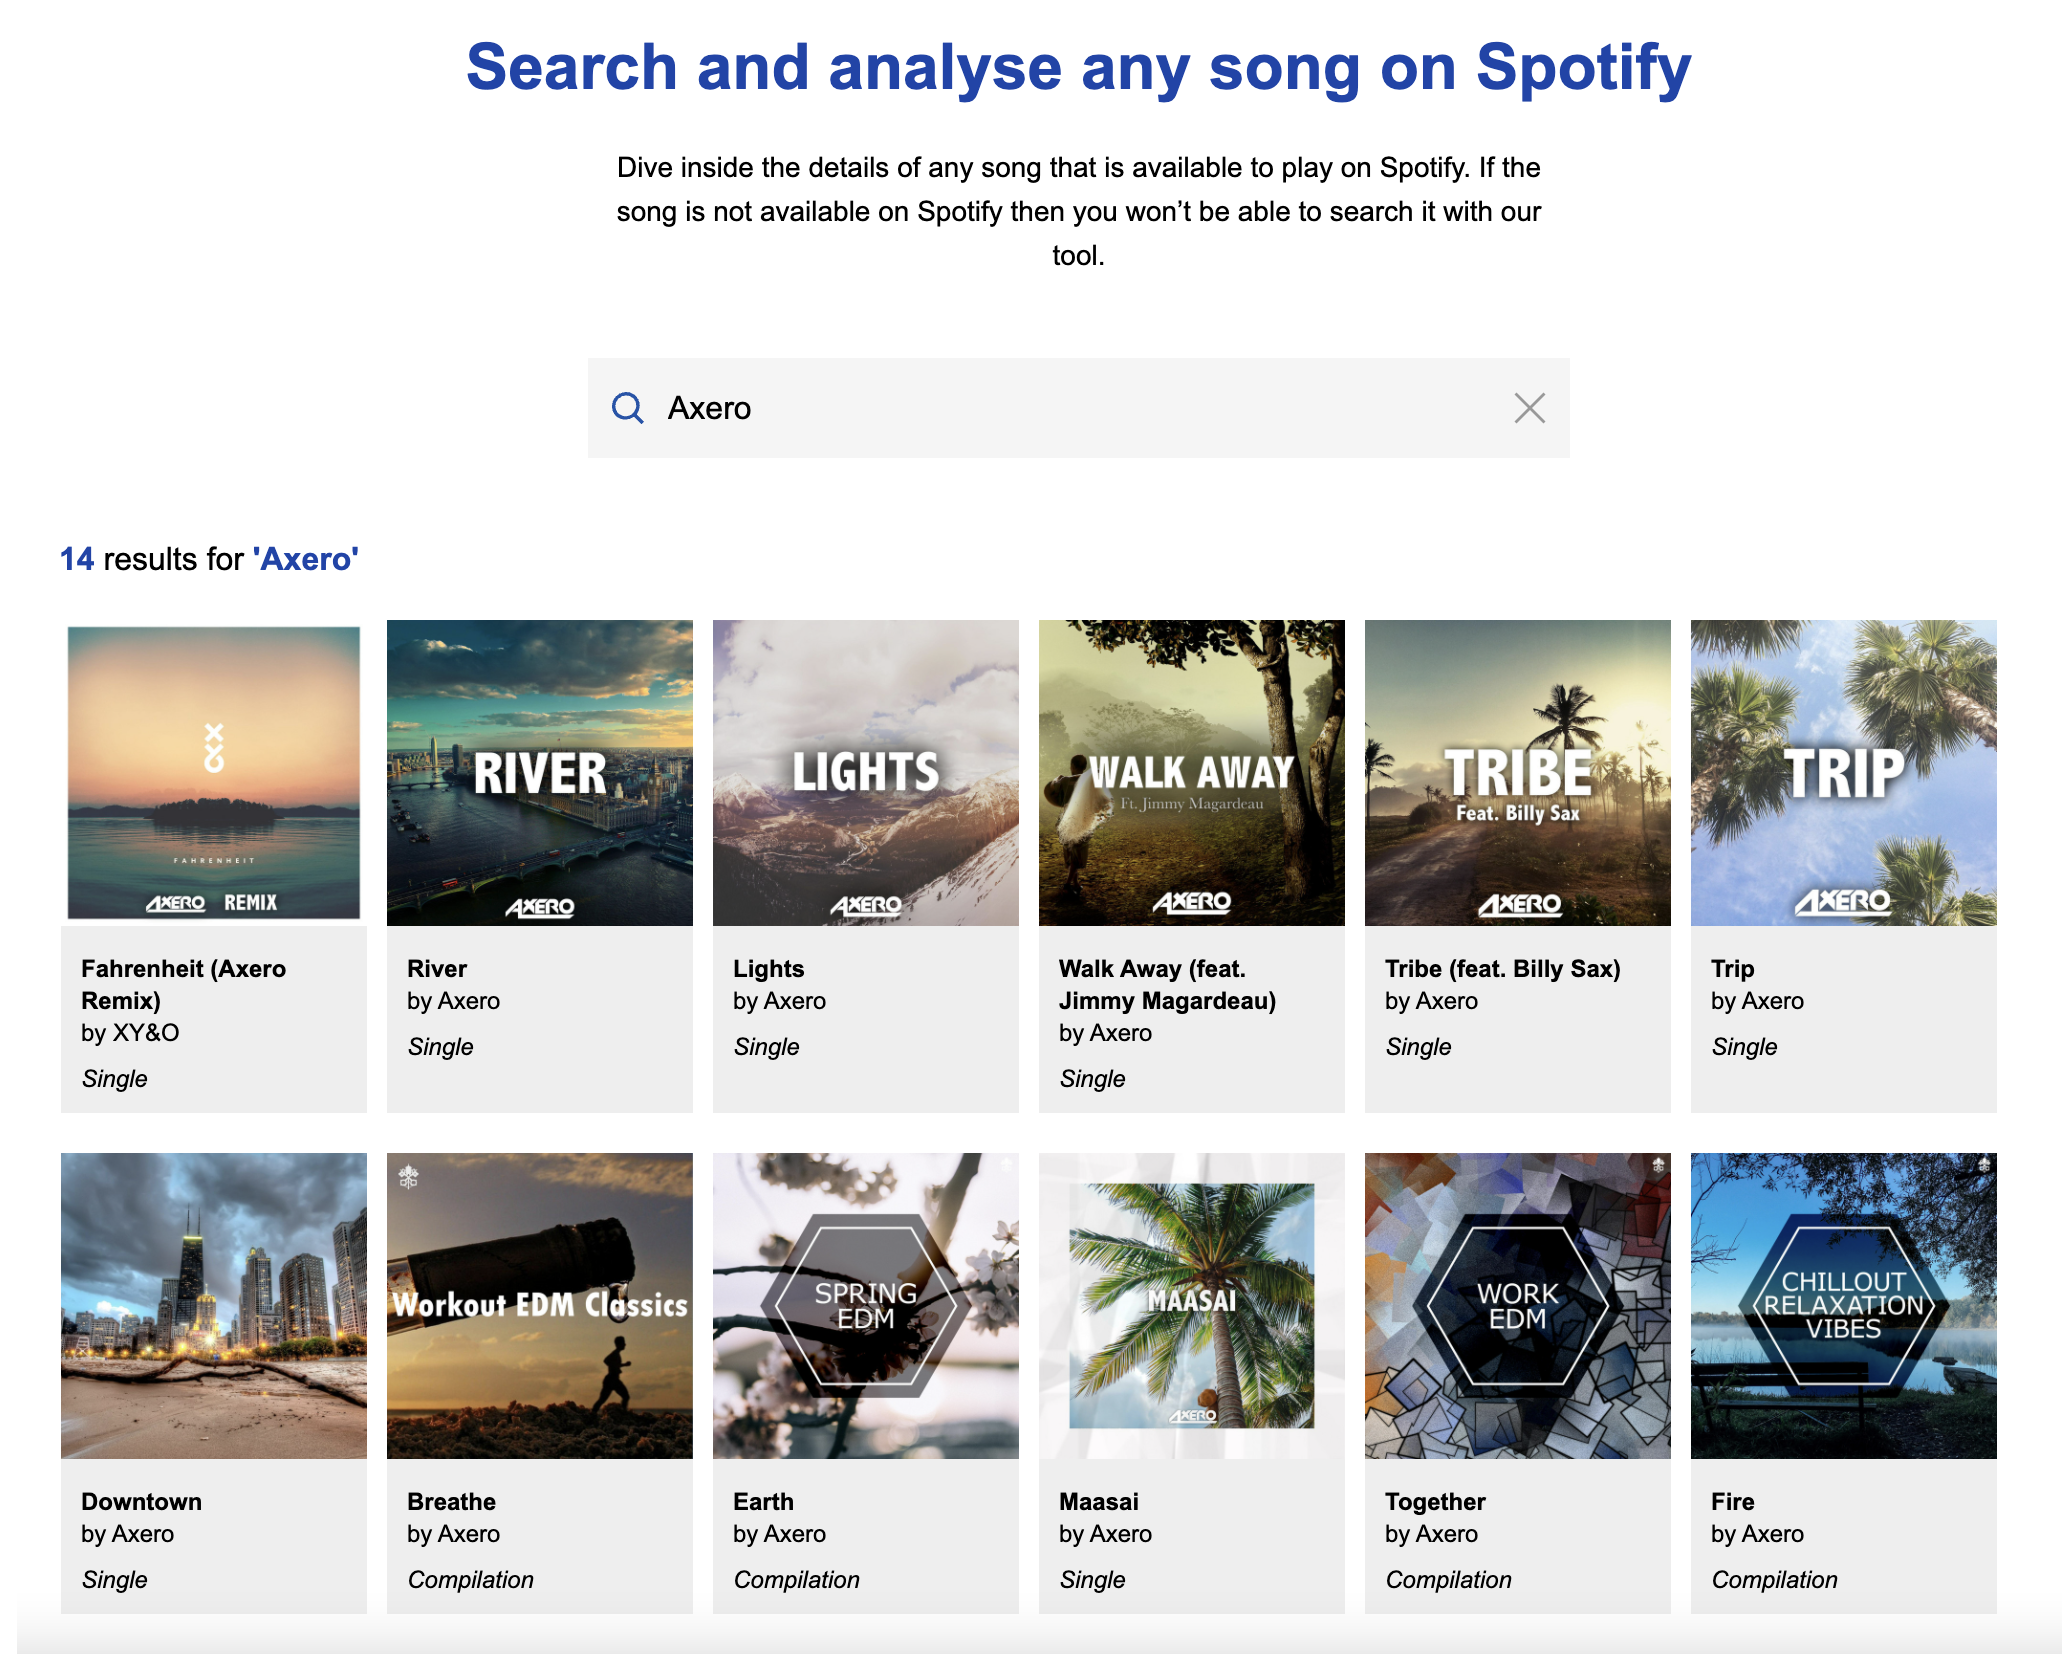 Searching for an artist in the Song Analysis tool